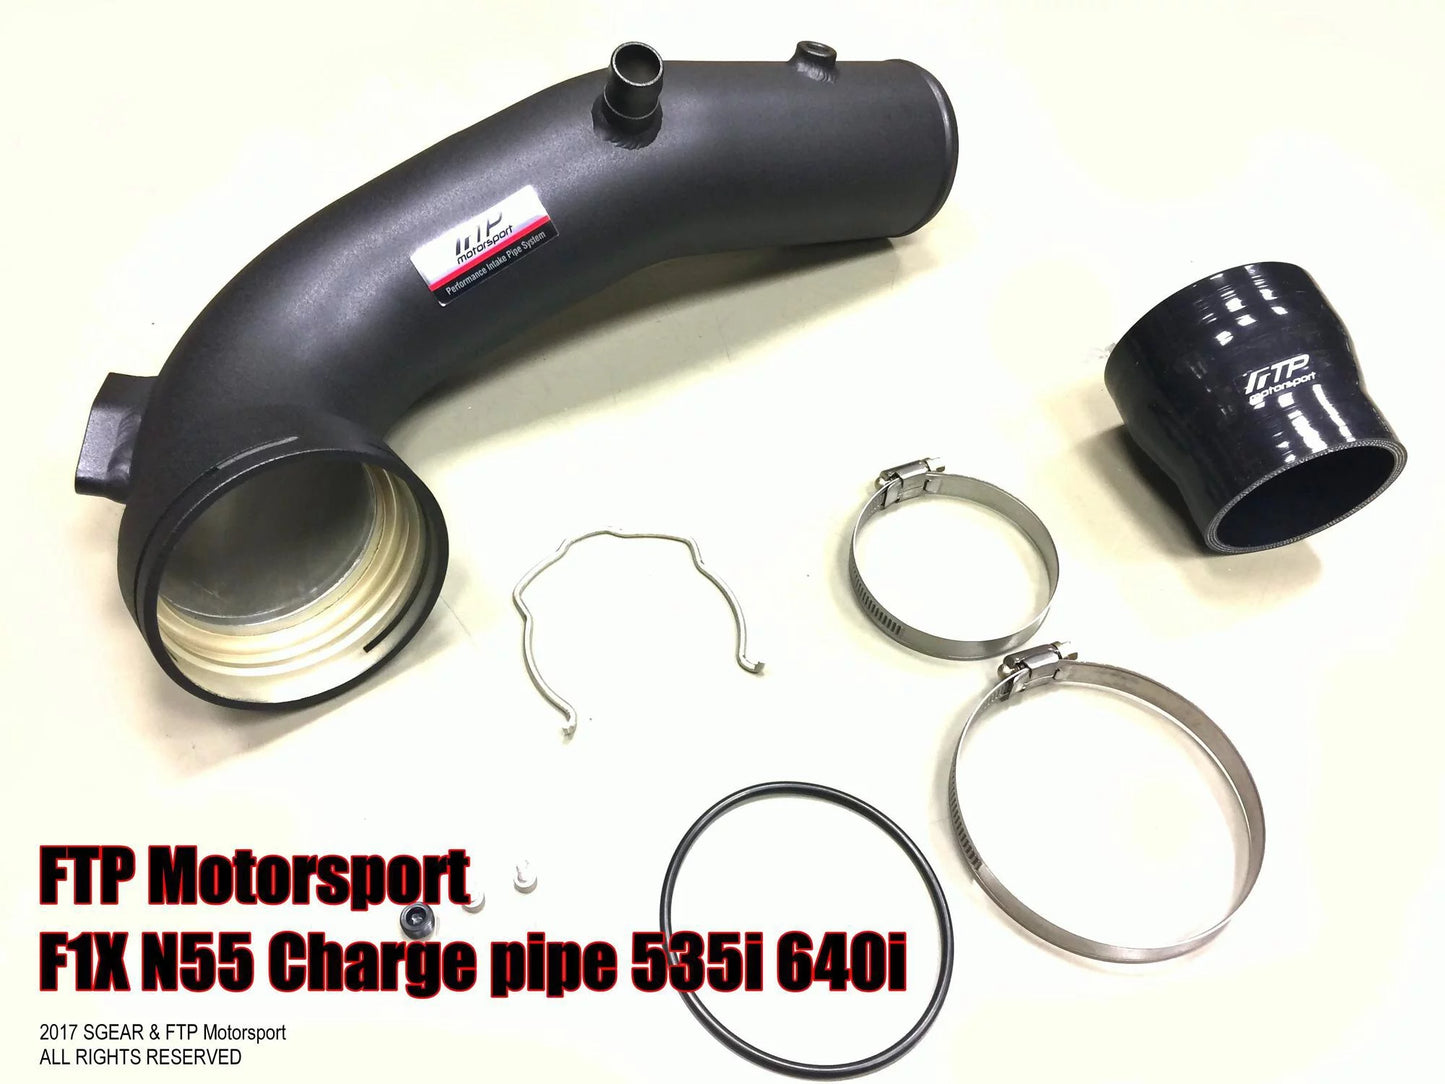 FTP Chargepipe || N55 (F1X)